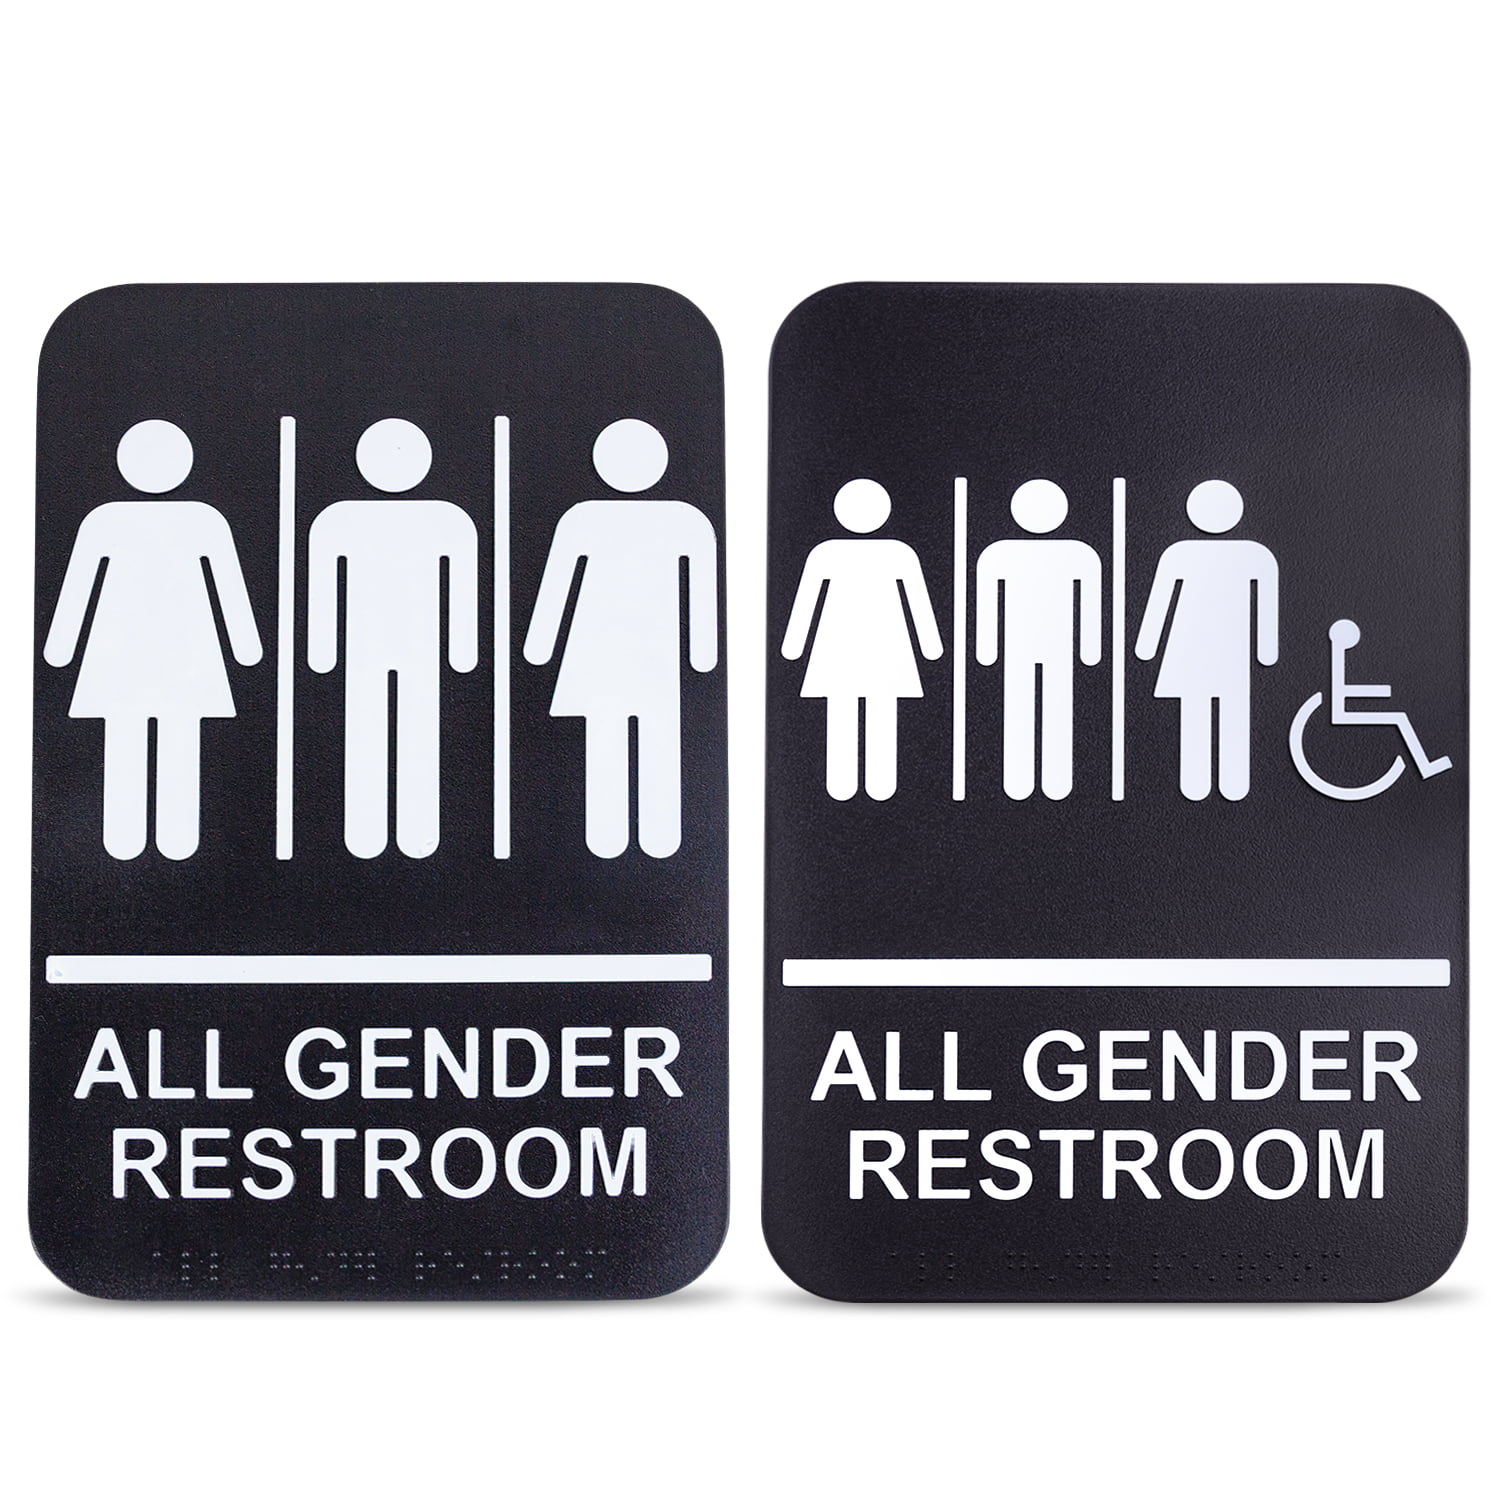 Men's Restroom Sign with Braille Black and White 9 x 6" ADA Compliant Sign 